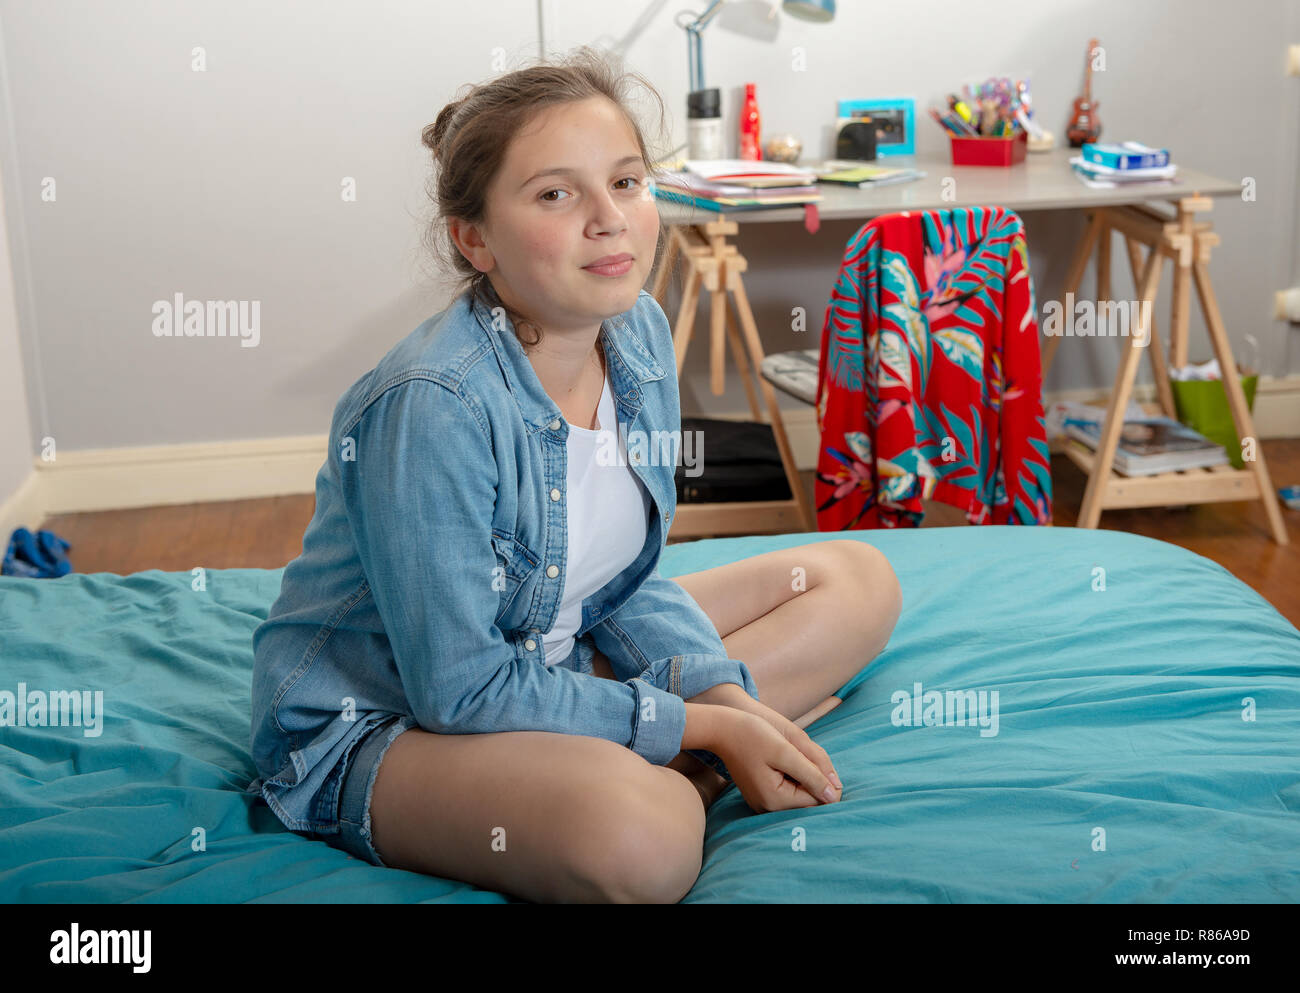 a young teenage girl sitting in cross-legs on the bed Stock Photo - Alamy